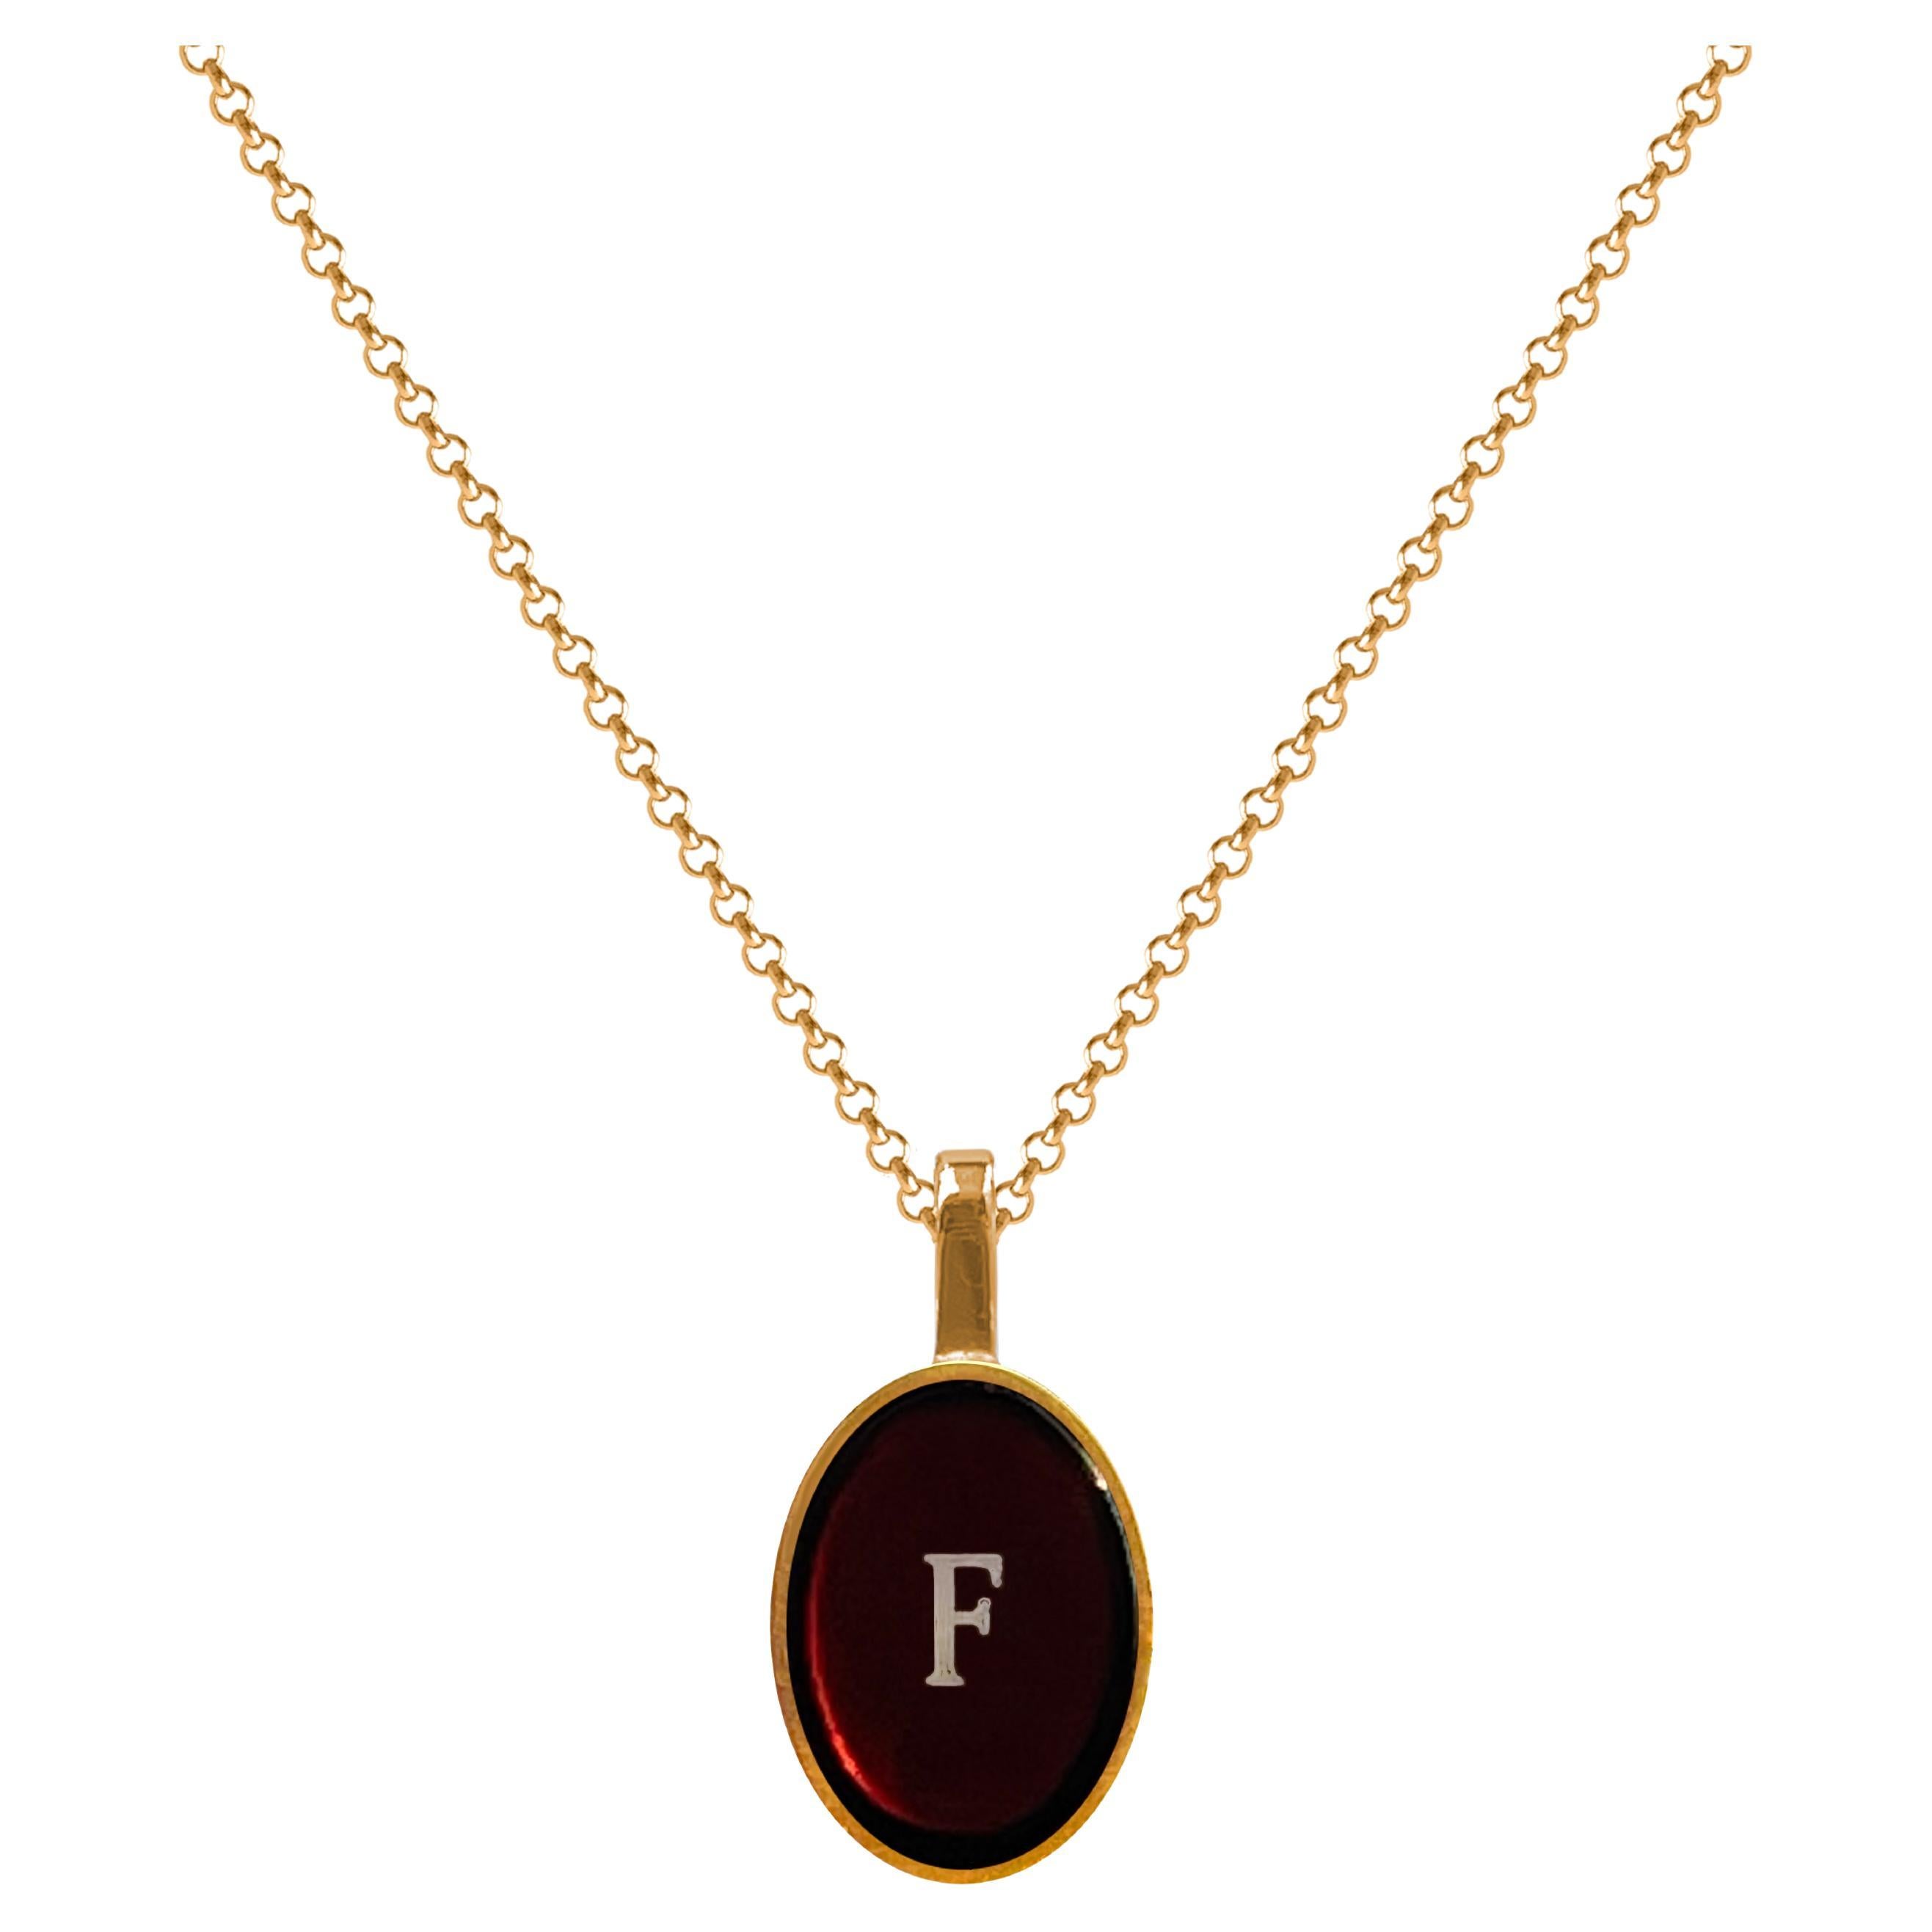 Necklace with amber pendant and name letter gold -F For Sale